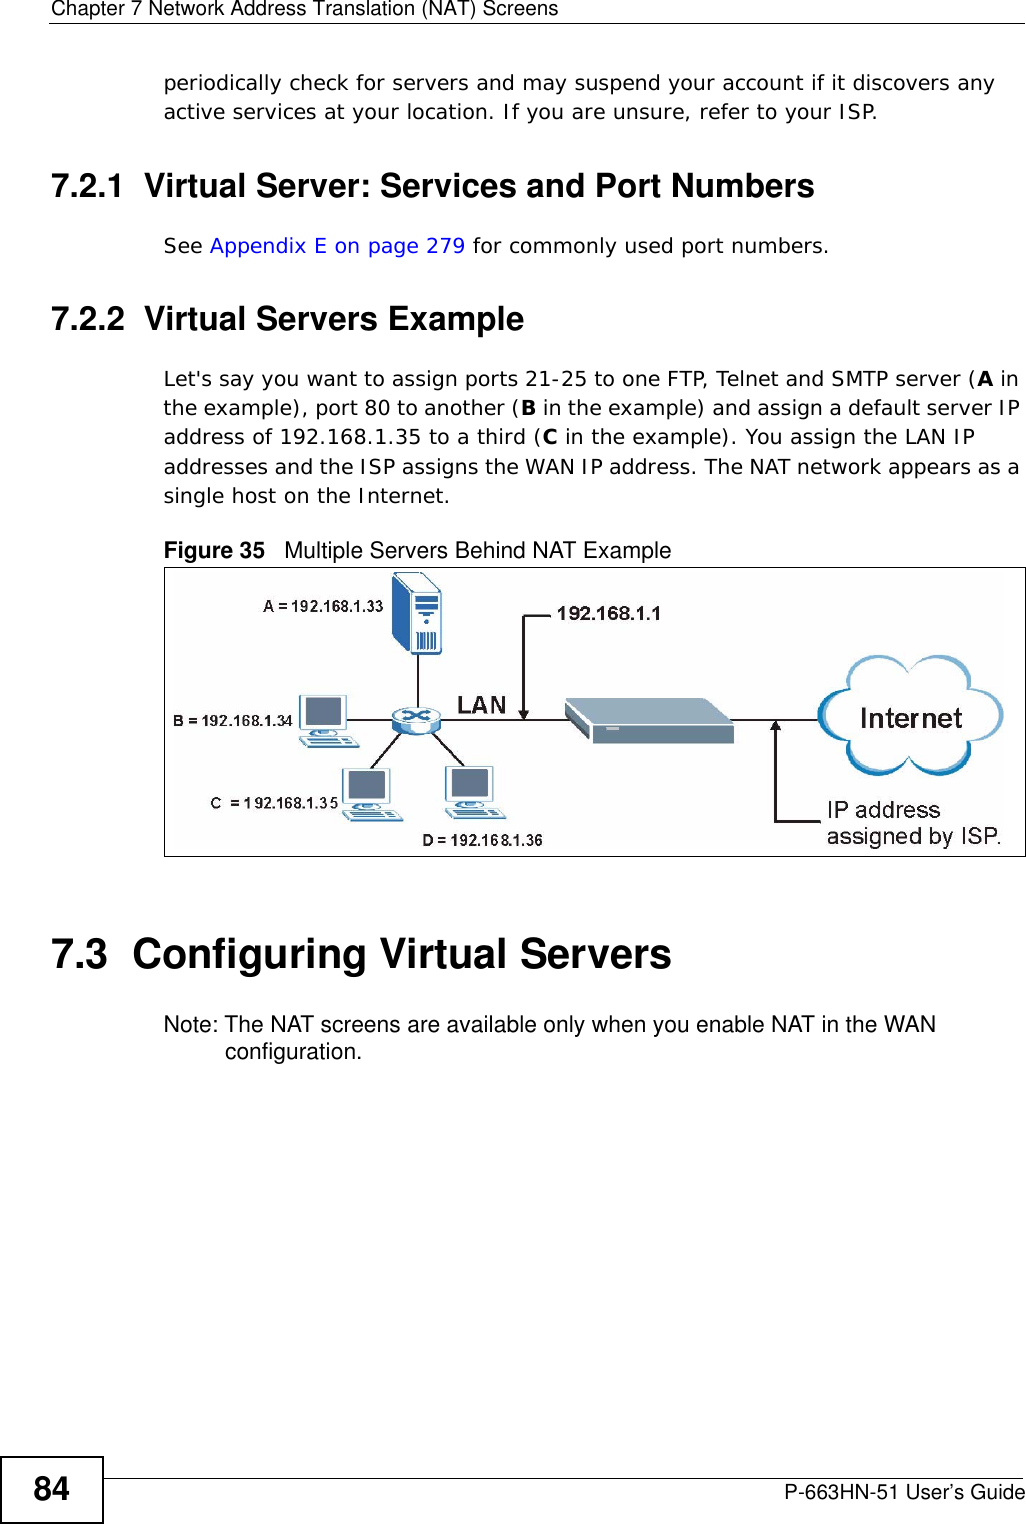 Chapter 7 Network Address Translation (NAT) ScreensP-663HN-51 User’s Guide84periodically check for servers and may suspend your account if it discovers any active services at your location. If you are unsure, refer to your ISP.7.2.1  Virtual Server: Services and Port NumbersSee Appendix E on page 279 for commonly used port numbers. 7.2.2  Virtual Servers ExampleLet&apos;s say you want to assign ports 21-25 to one FTP, Telnet and SMTP server (A in the example), port 80 to another (B in the example) and assign a default server IP address of 192.168.1.35 to a third (C in the example). You assign the LAN IP addresses and the ISP assigns the WAN IP address. The NAT network appears as a single host on the Internet.Figure 35   Multiple Servers Behind NAT Example7.3  Configuring Virtual Servers Note: The NAT screens are available only when you enable NAT in the WAN configuration. 